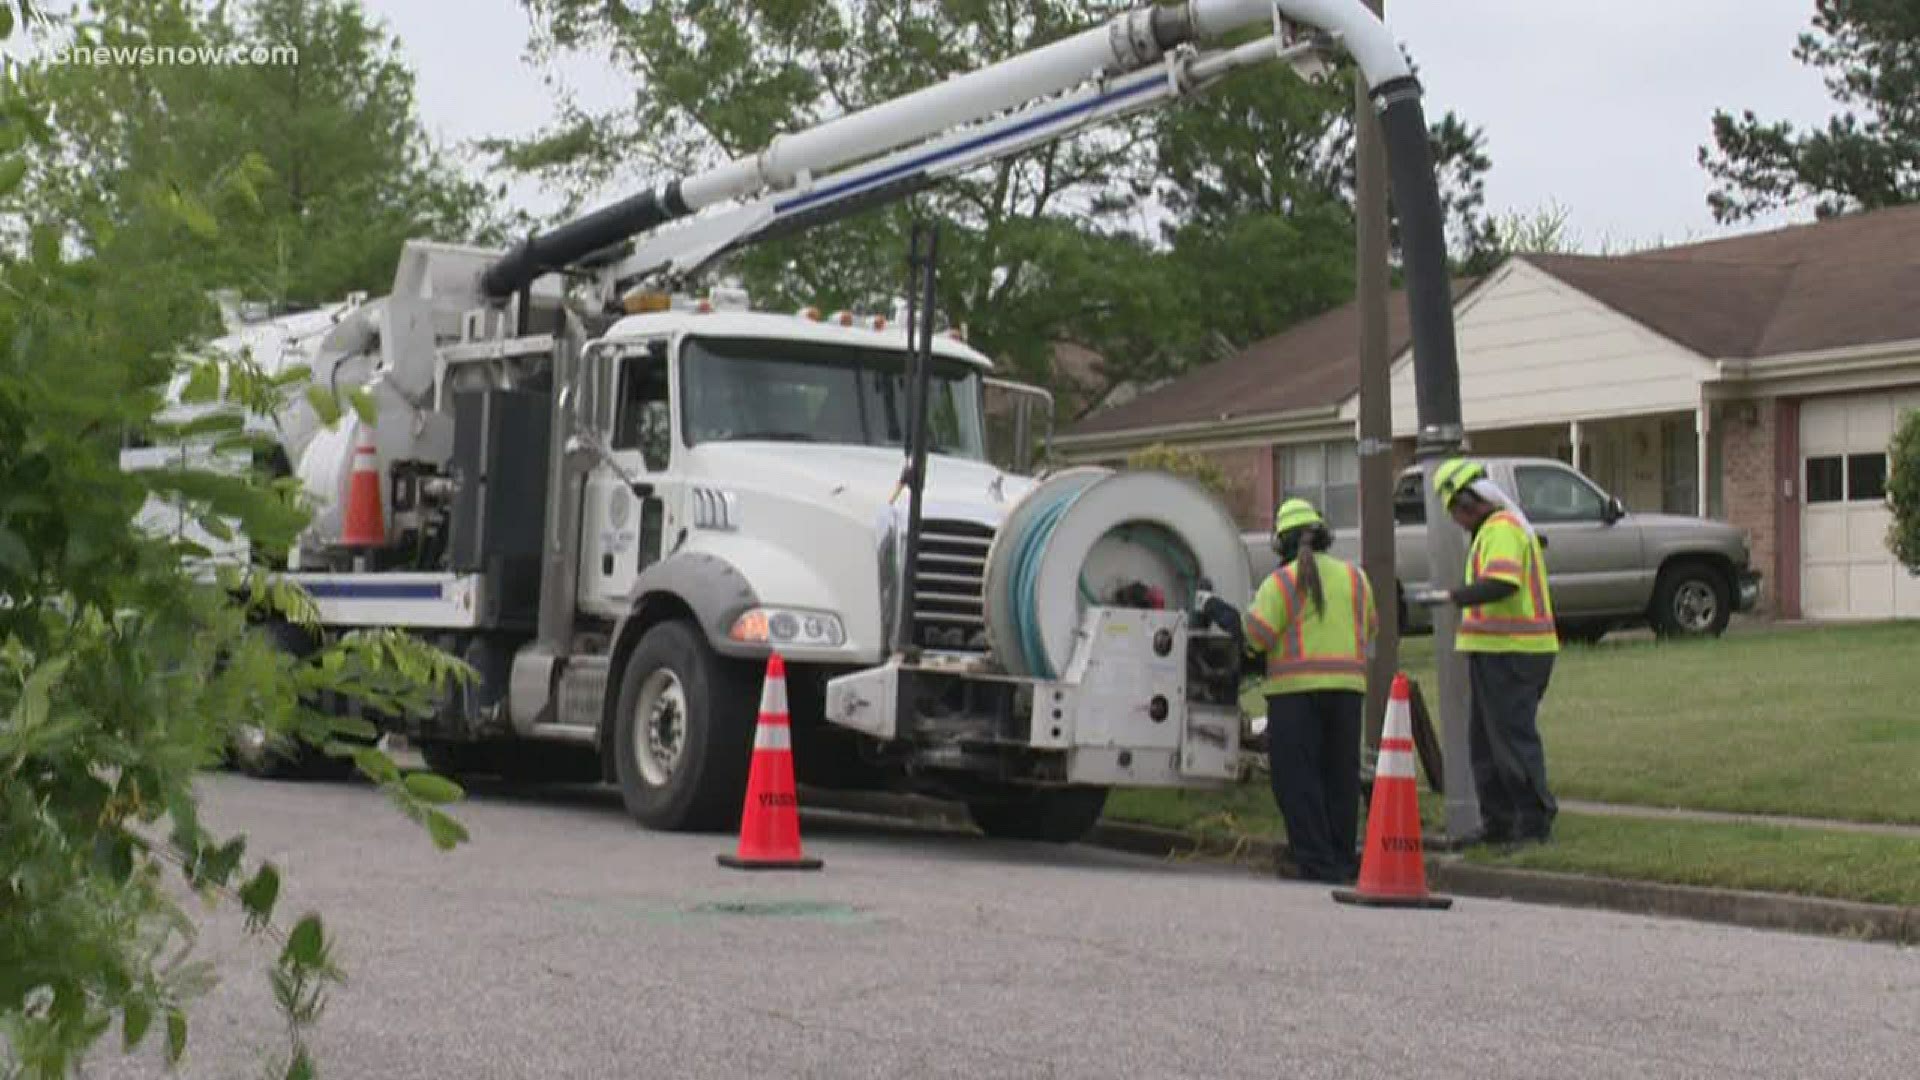 Crews in Hampton Roads worked proactively ahead of Thursday's storm to get storm drains cleaned out. The weather still took out power lines and flooded some roads.